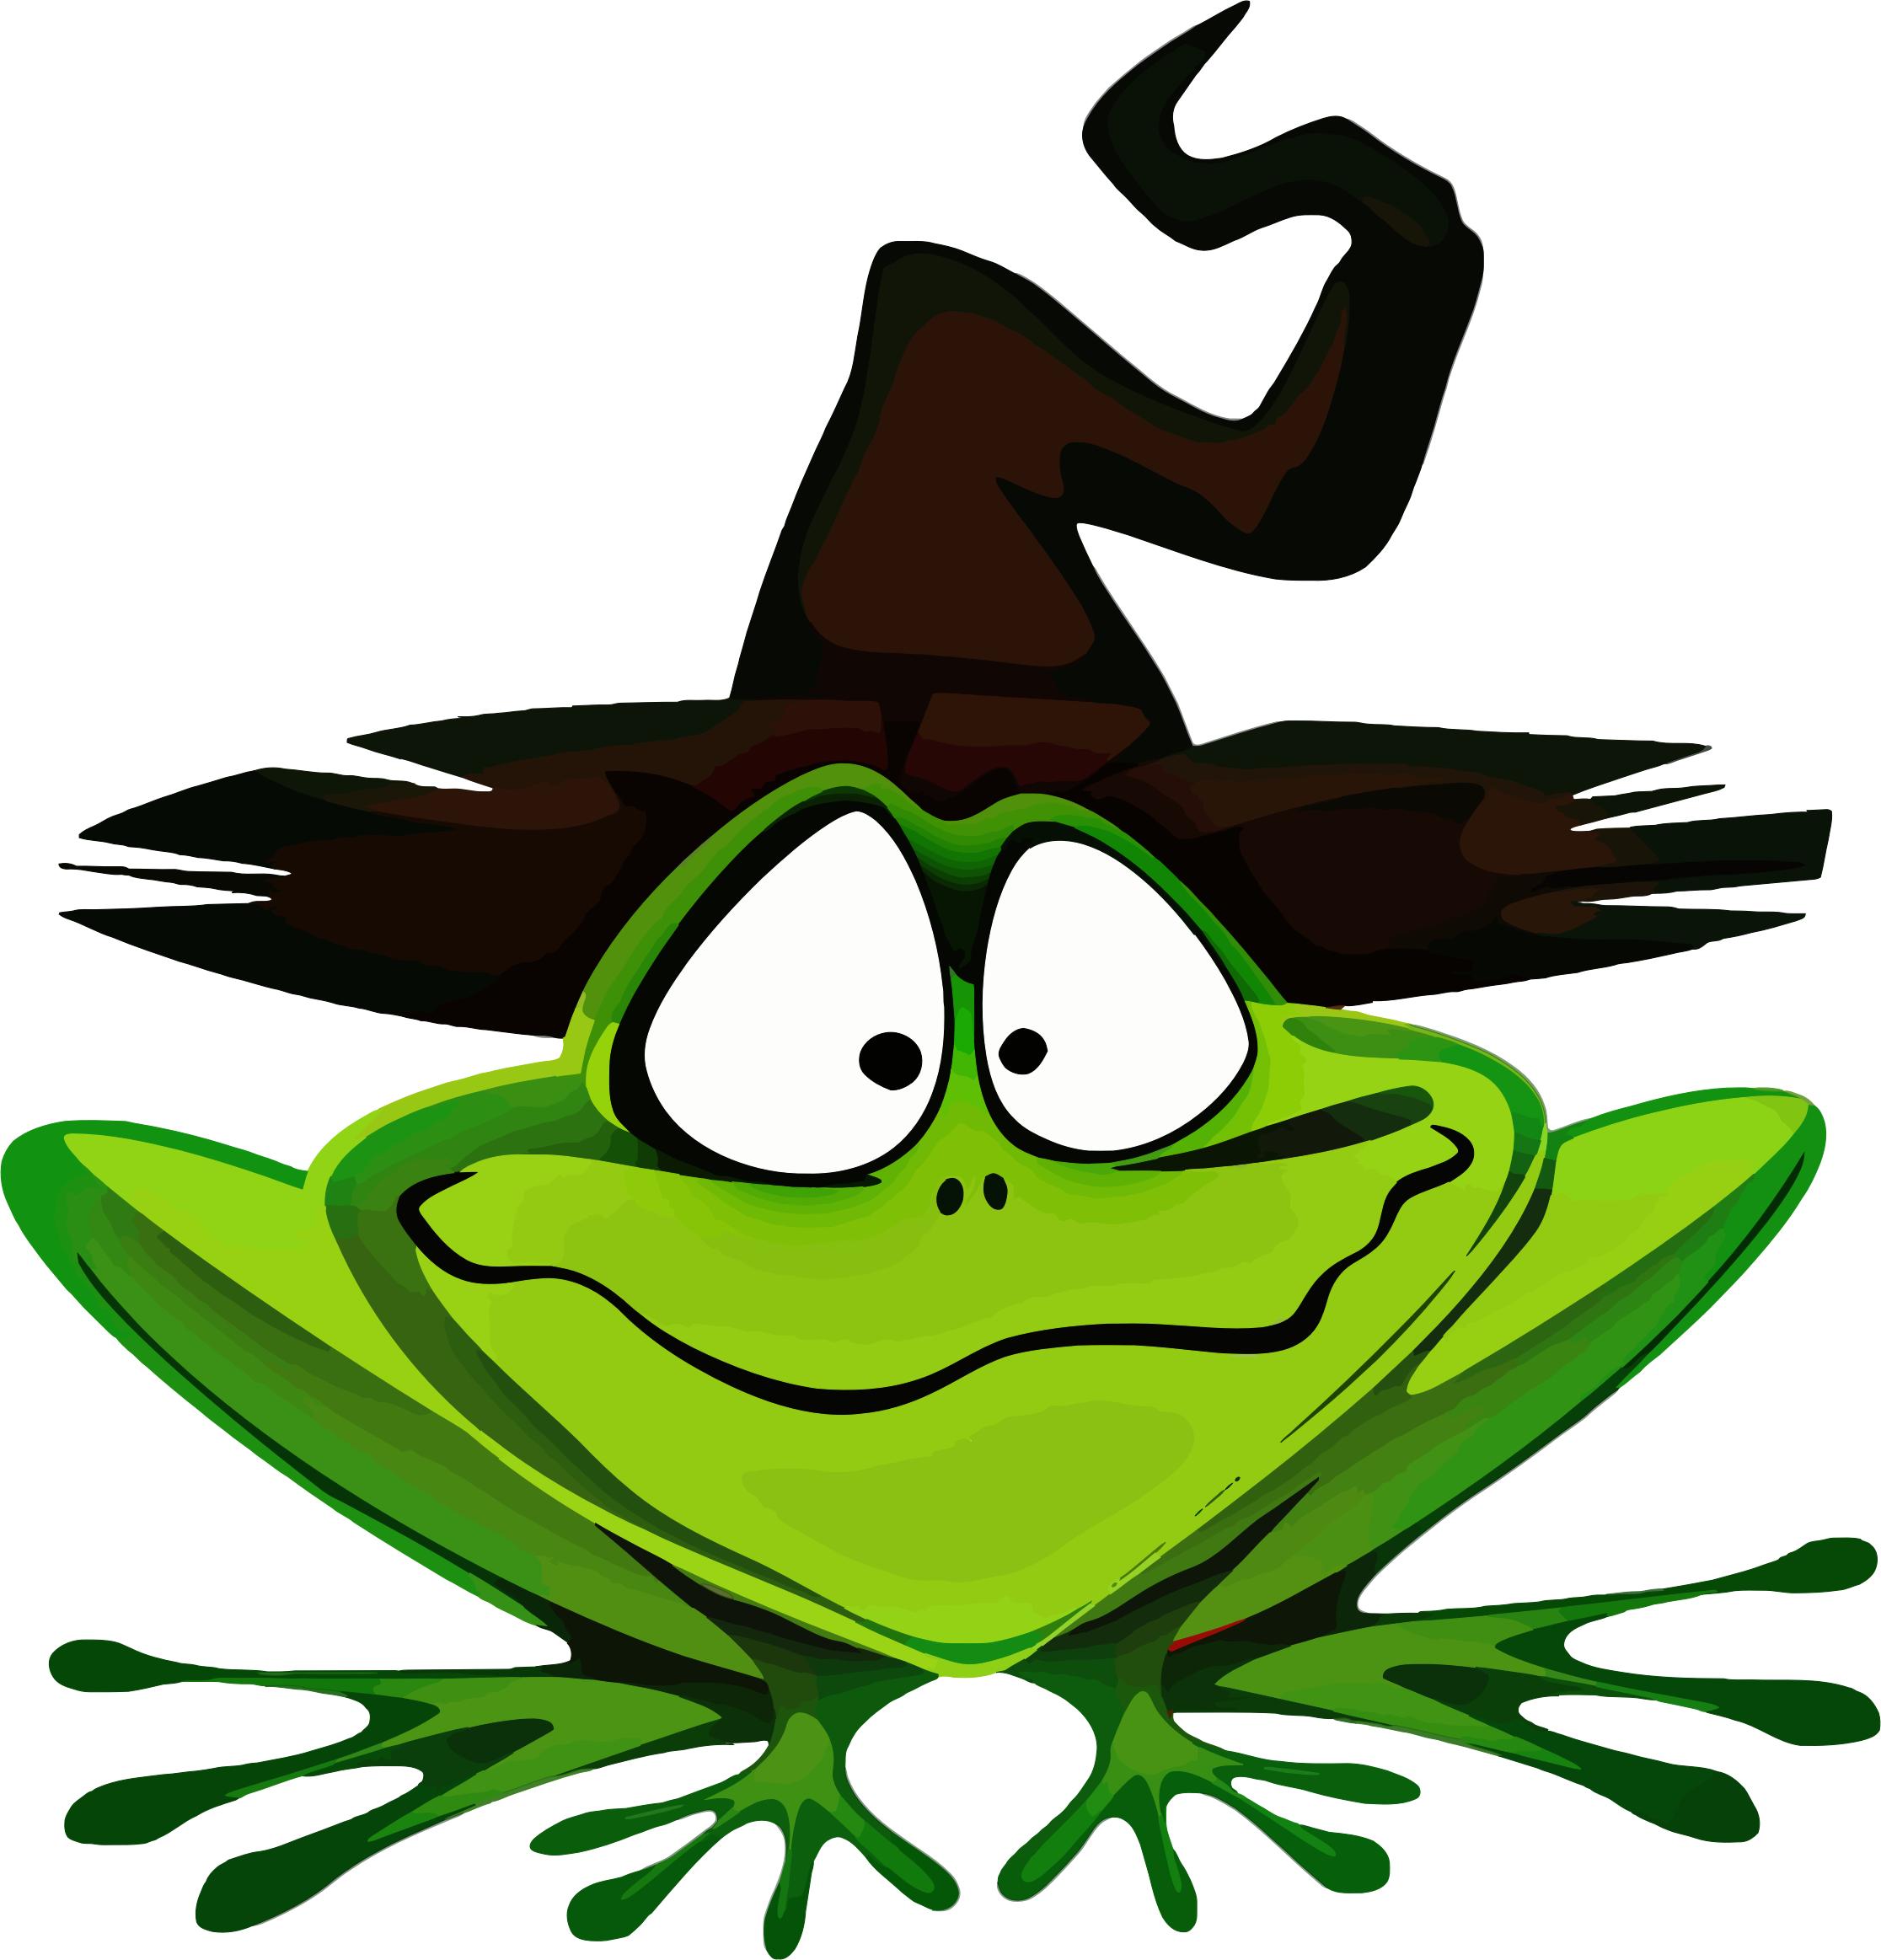 Frog Wearing Witch's Hat png